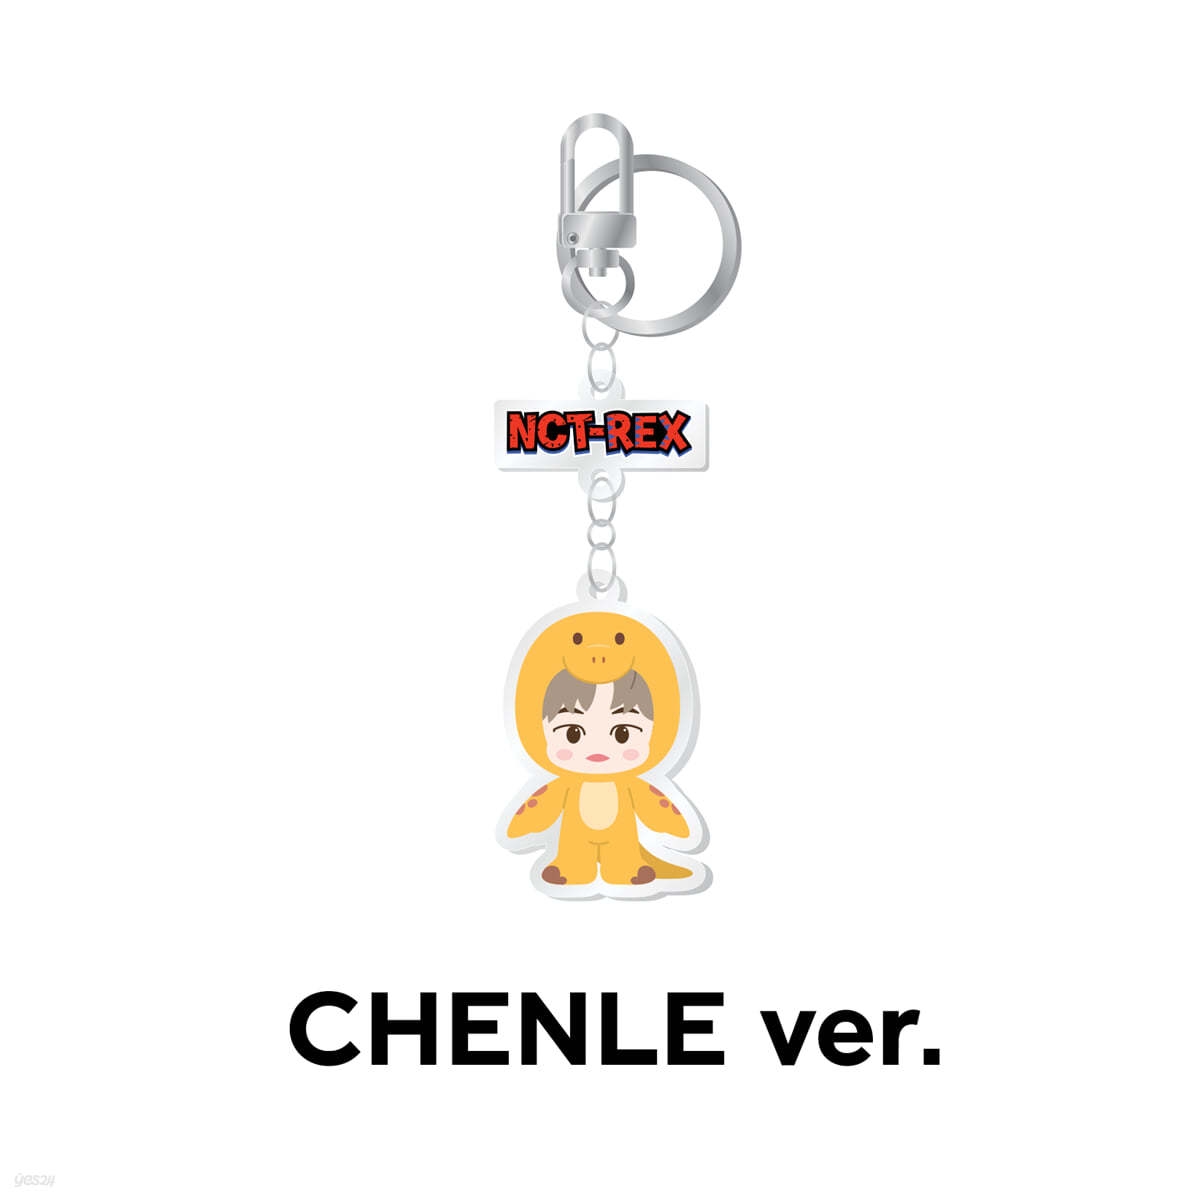 [CHENLE] ACRYLIC KEY RING - NCT DREAM X PINKFONG 